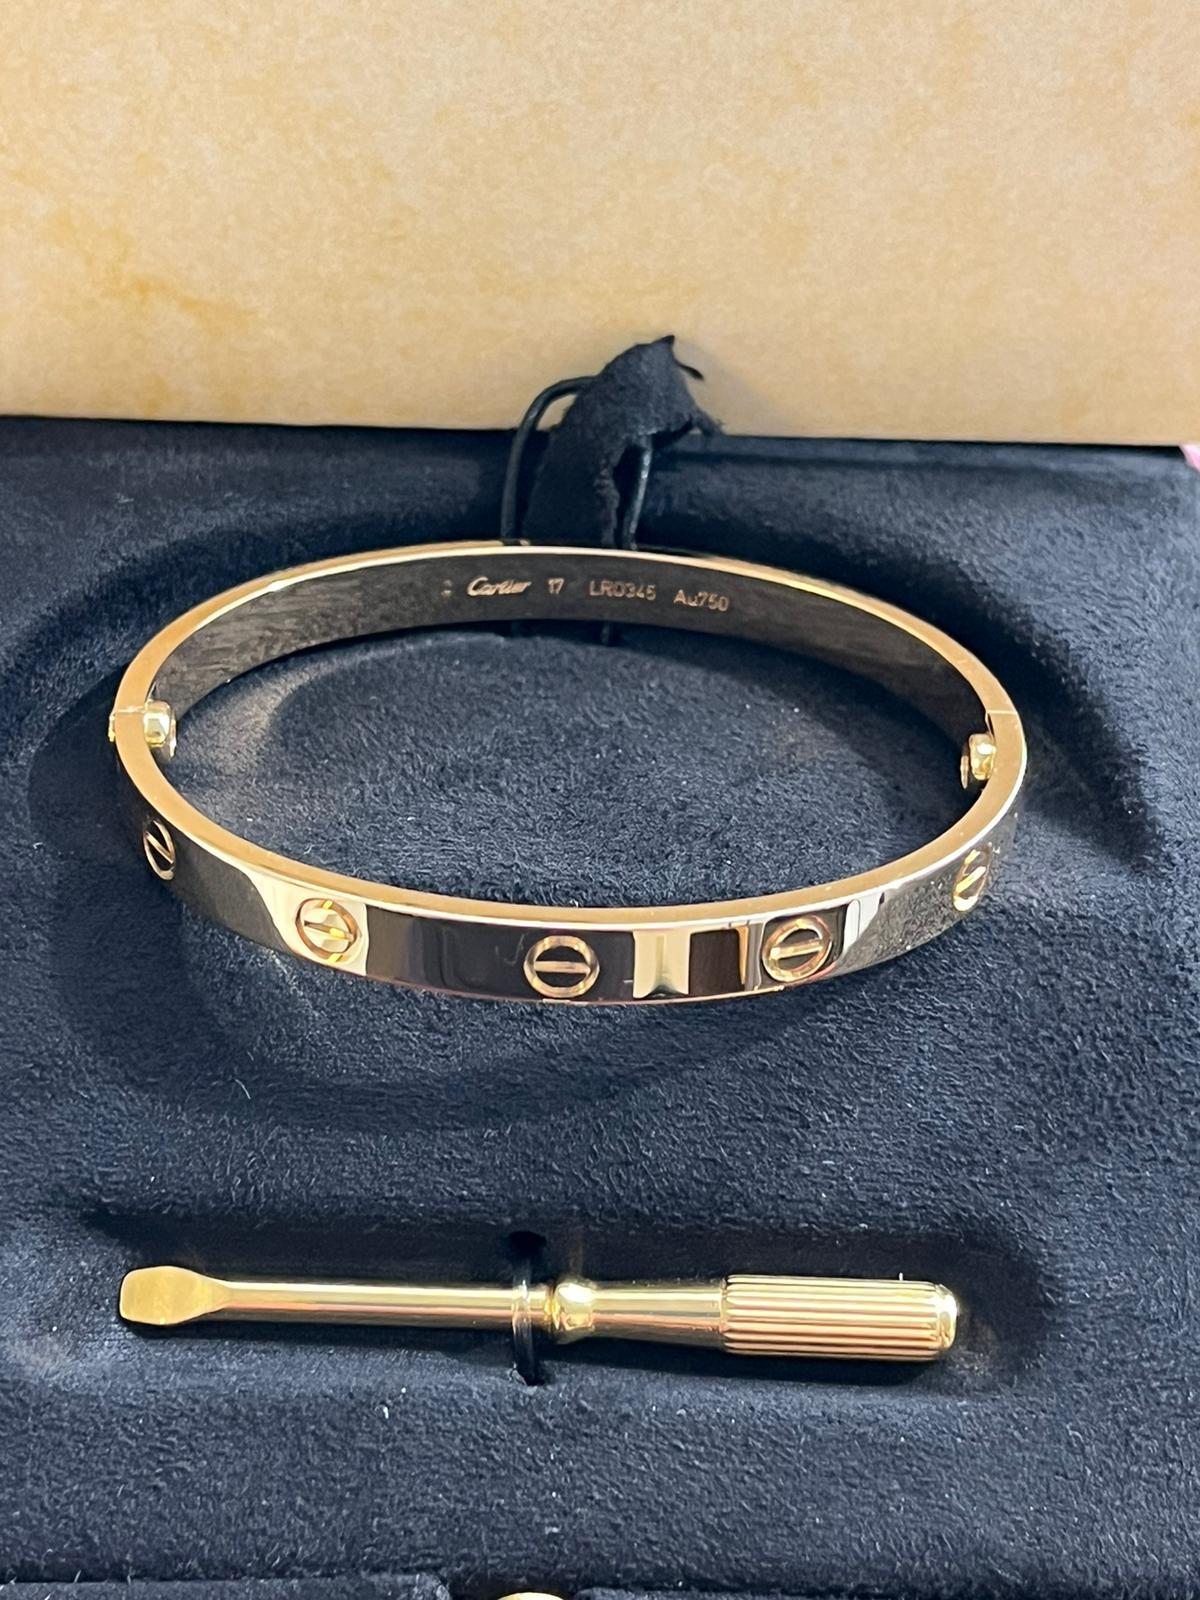 Cartier Love Bracelet 17 Size 18K Yellow Gold with Screwdriver 3